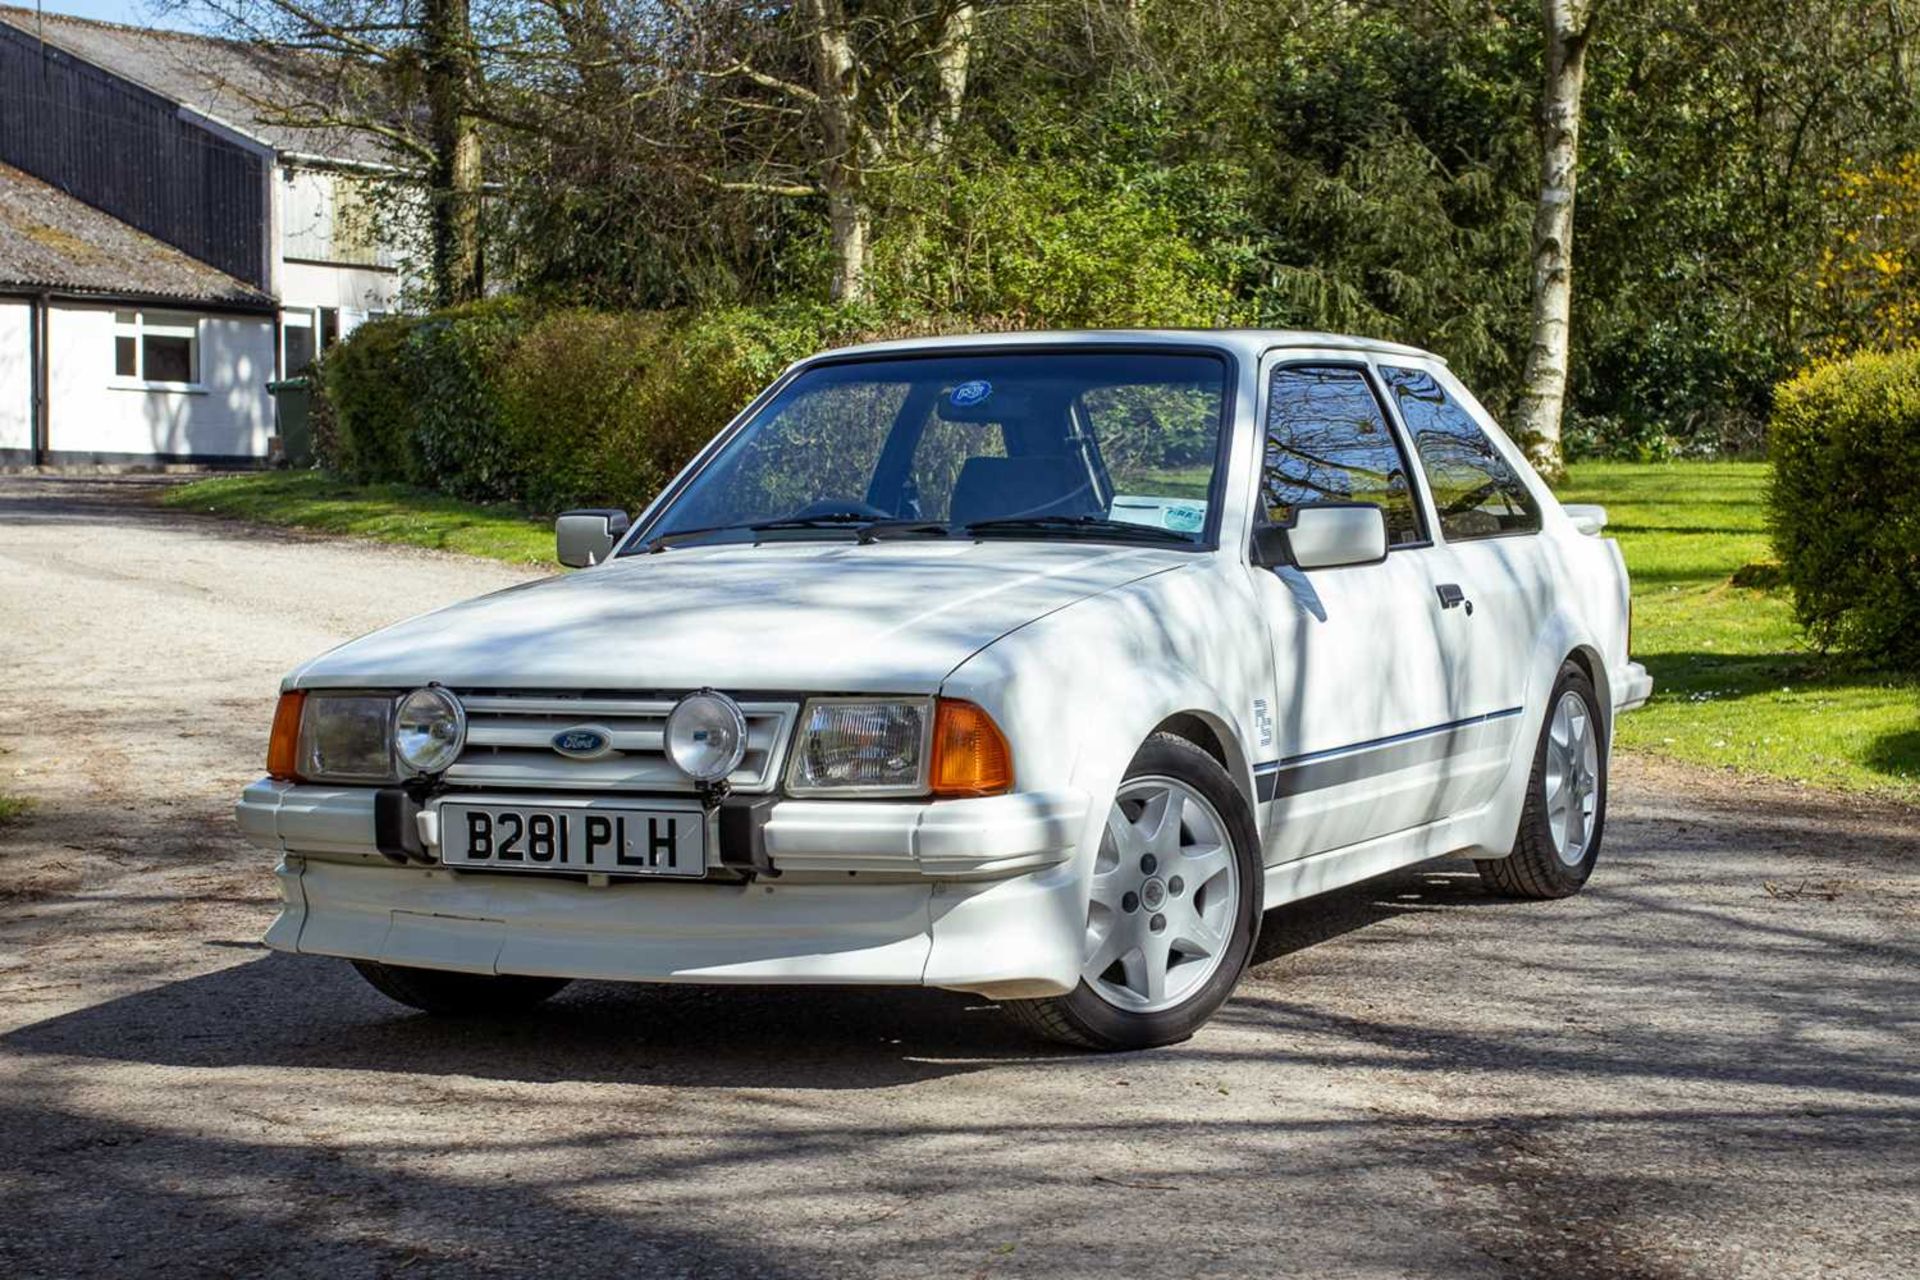 1985 Ford Escort RS Turbo S1 Subject to a full restoration  - Image 5 of 76